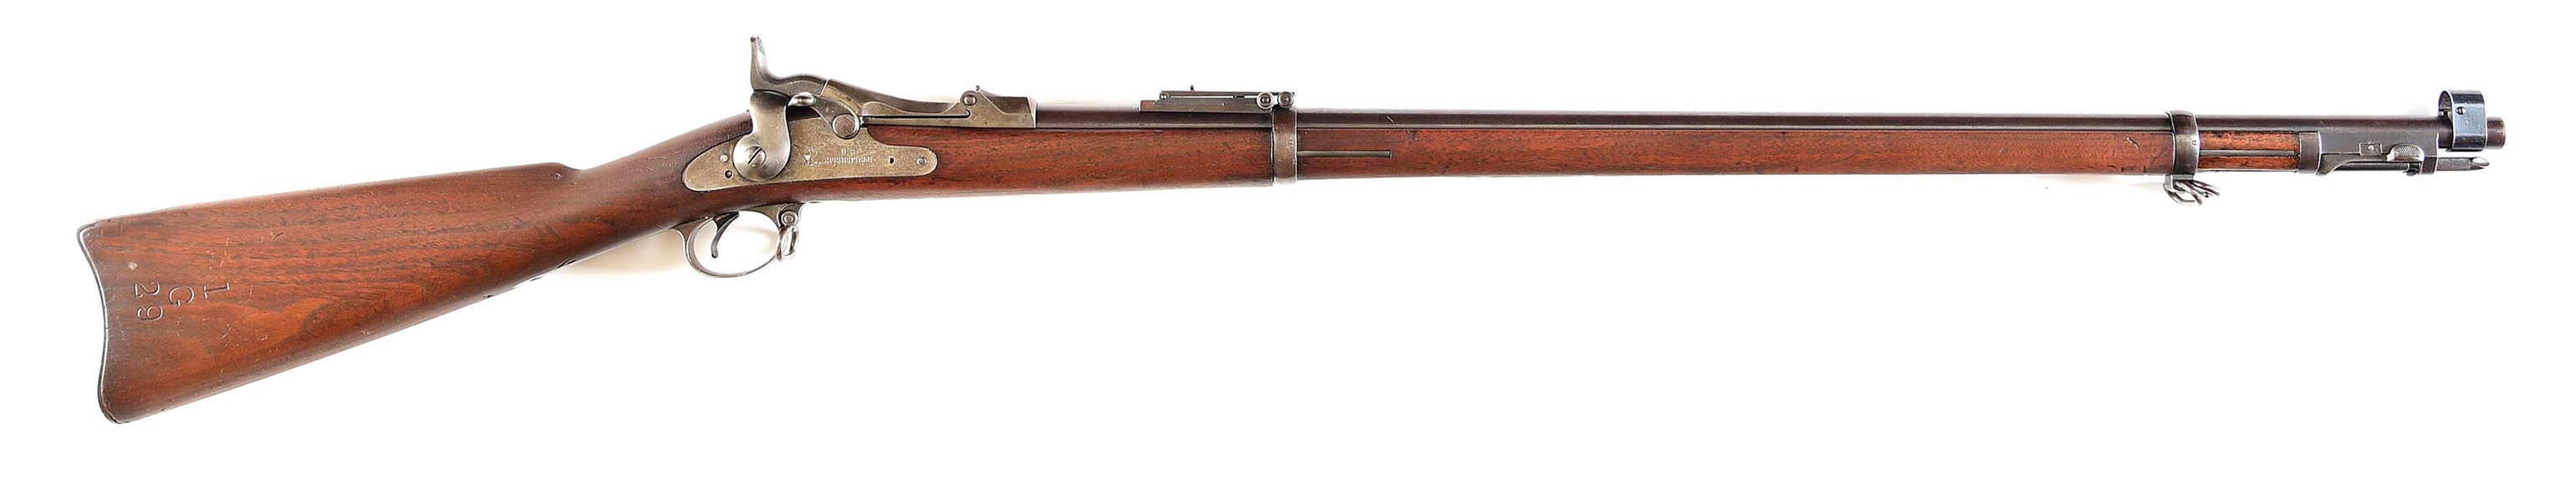 (A) US SPRINGFIELD 1888 TRAPDOOR RIFLE.